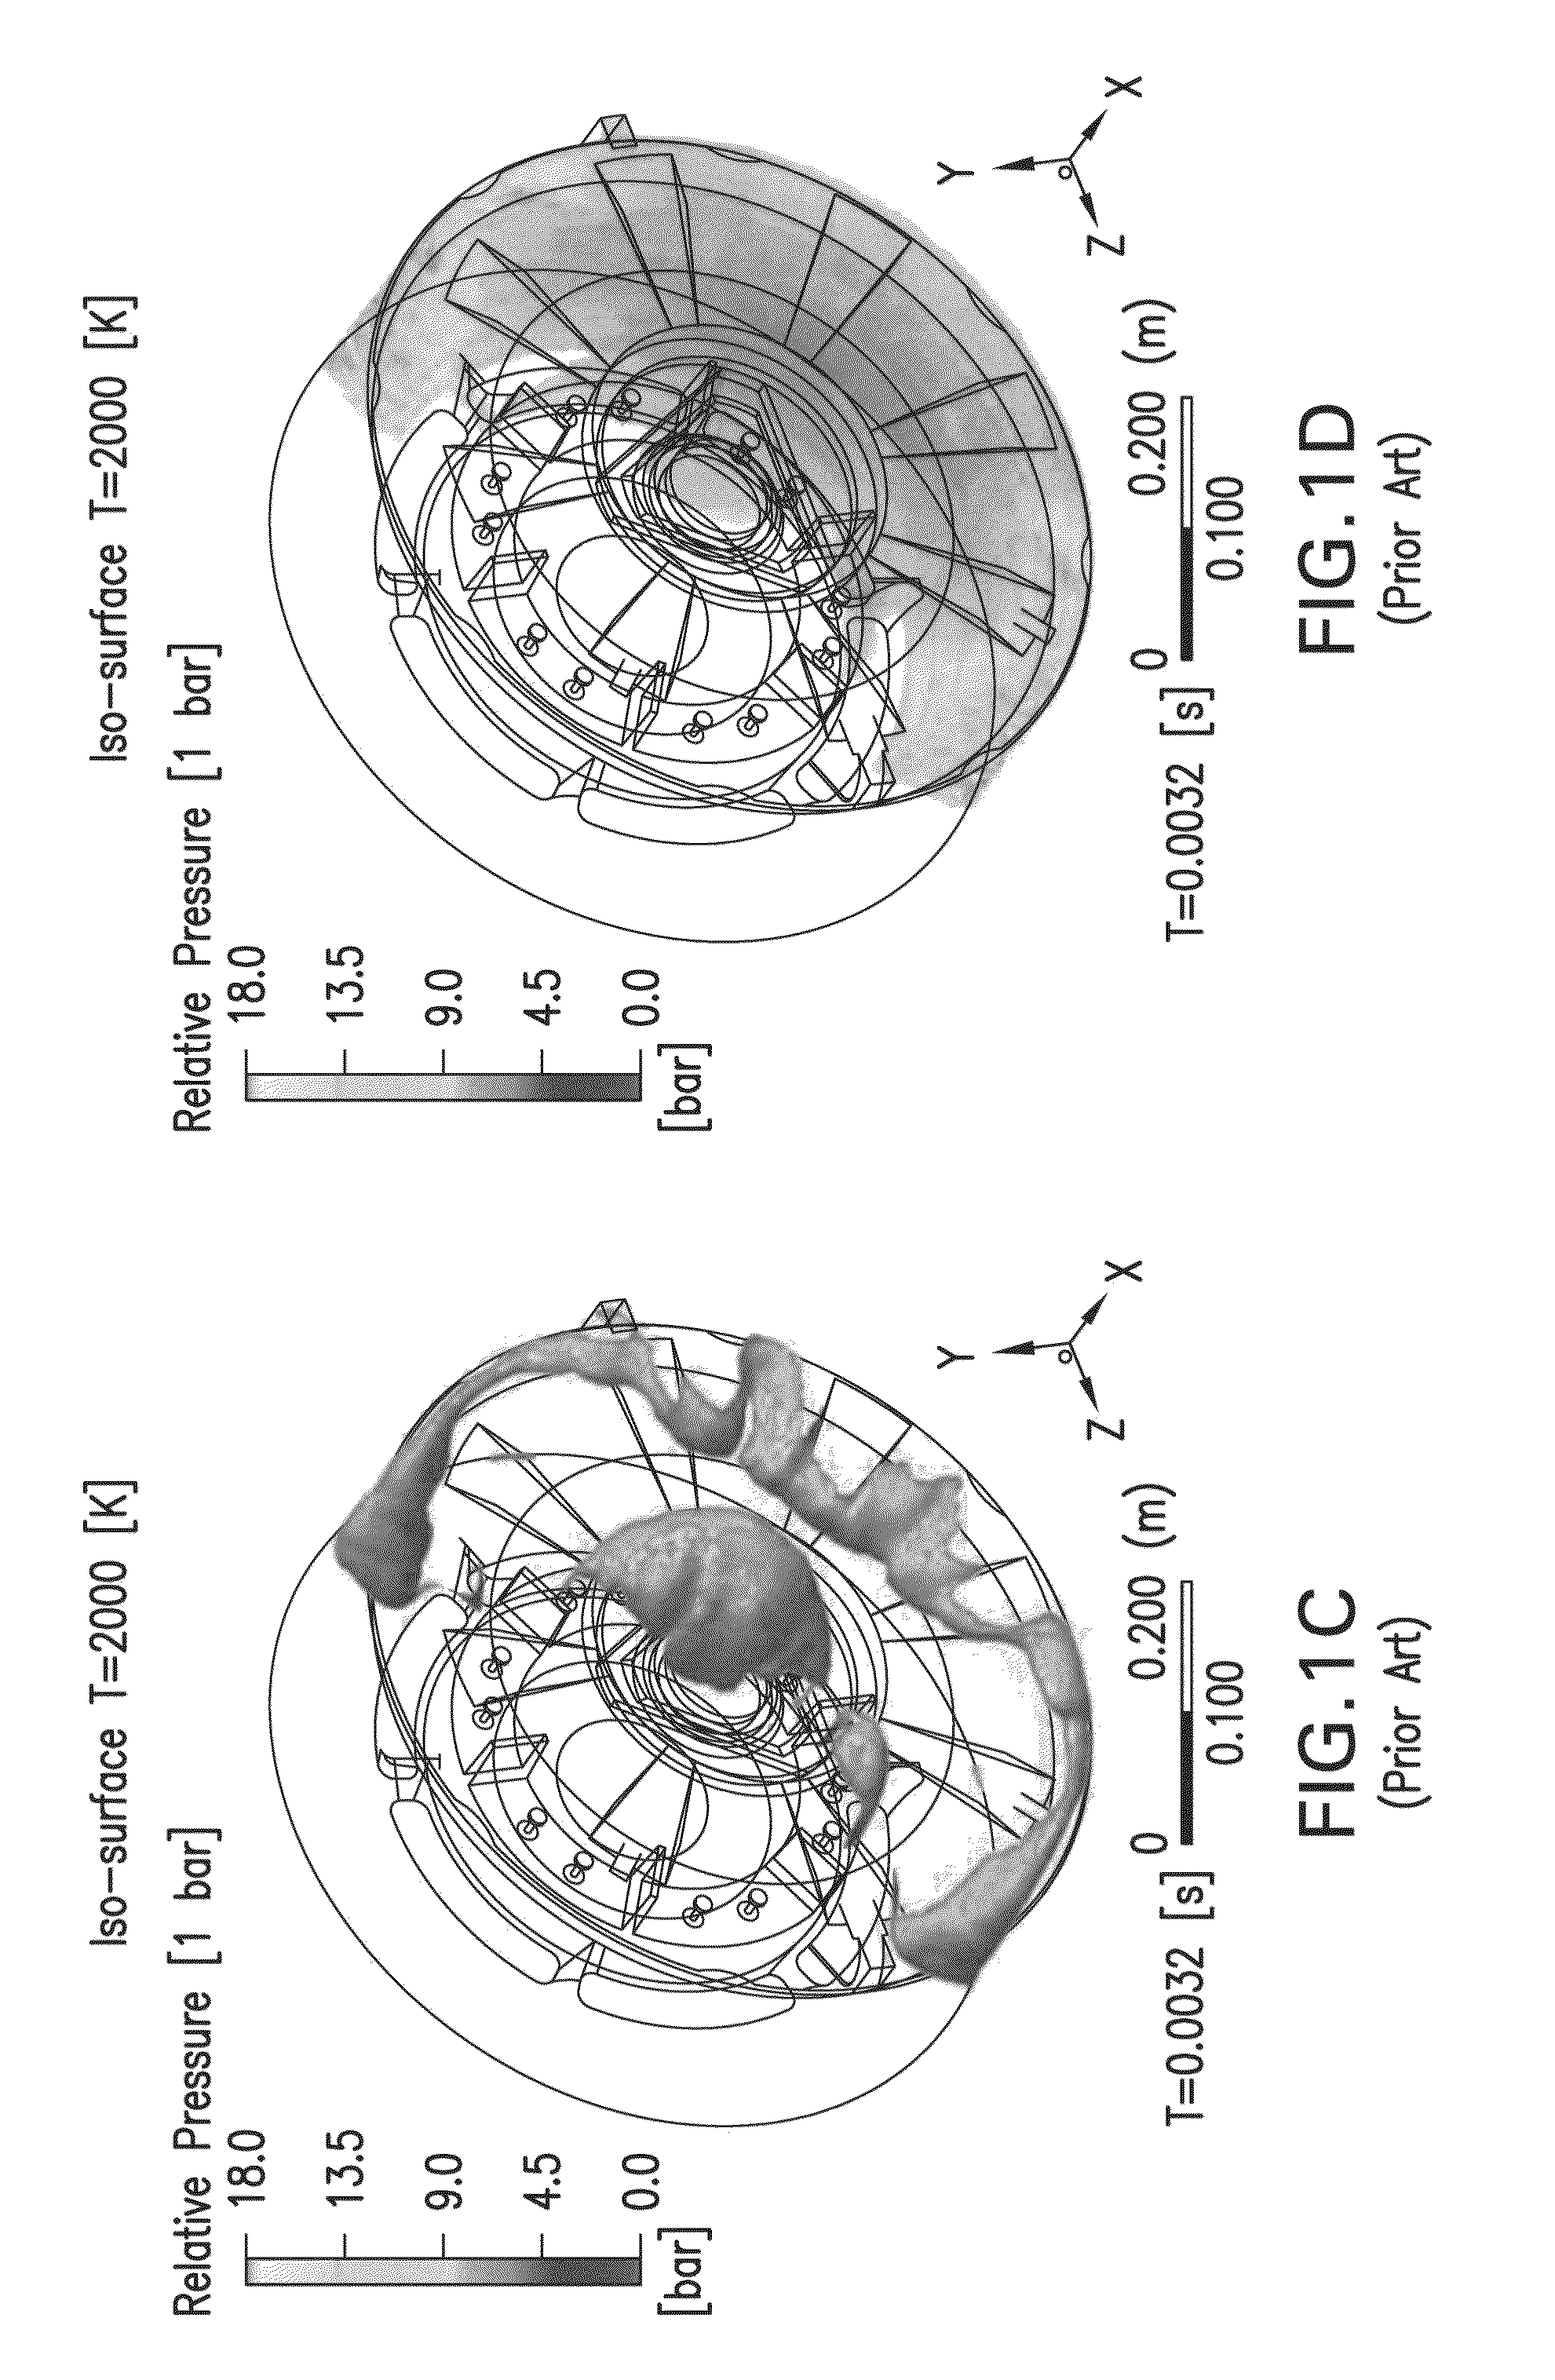 Internal Pressure Attenuator Device for Rotating Electrical Machines Able To Operate in Explosive Atmospheres